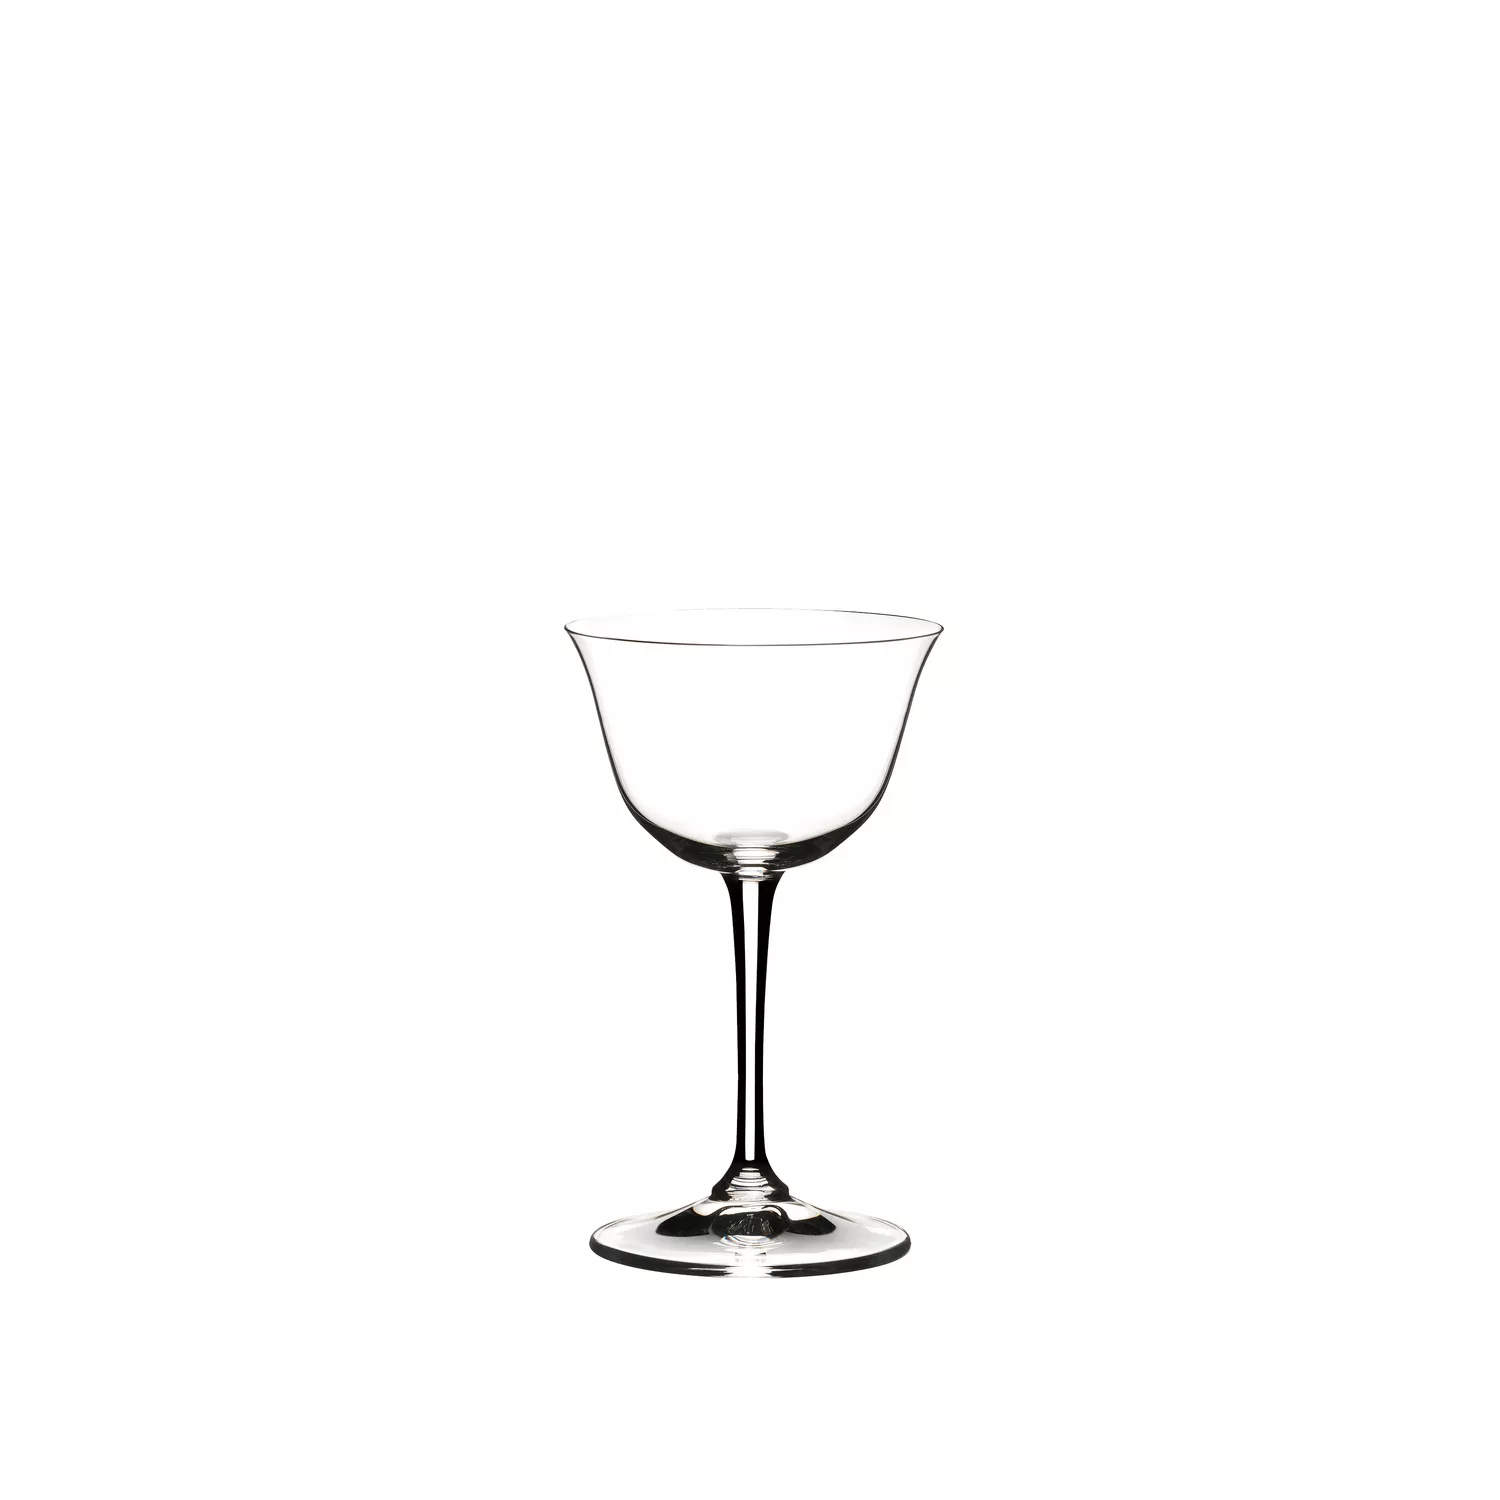 RIEDEL Drink Specific Glassware Sour Glass, Set of 2